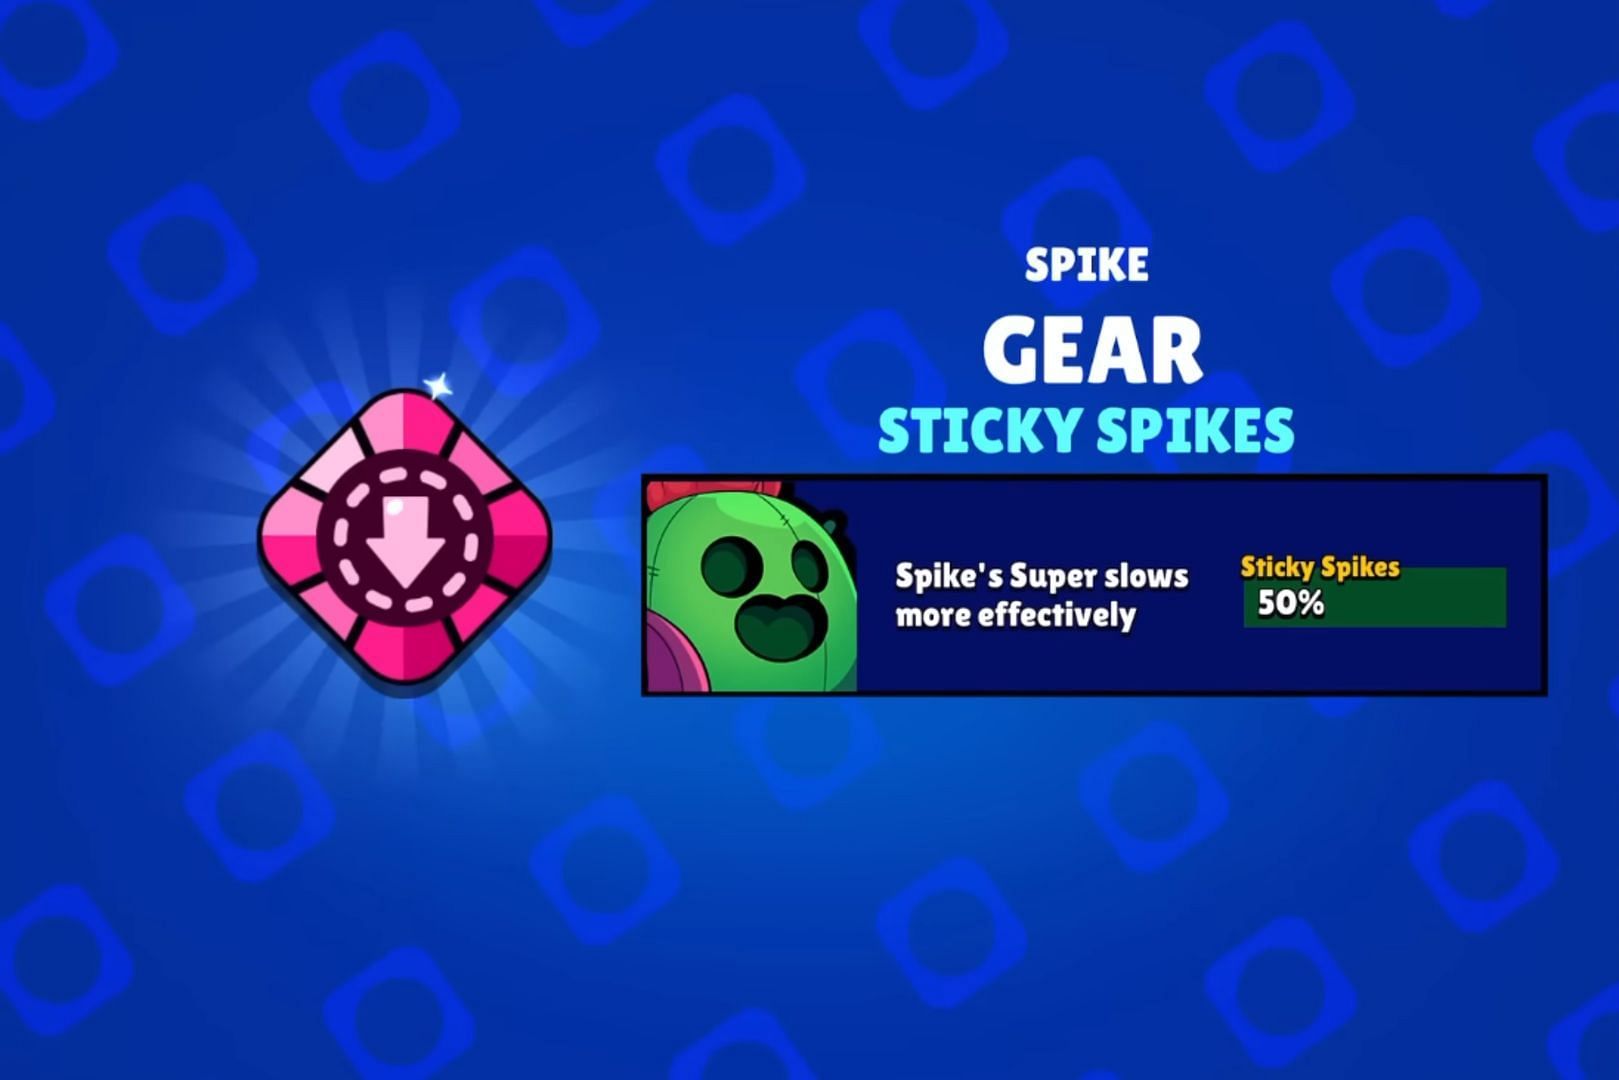 Sticky Spikes Mythic Gear (Image via Supercell)